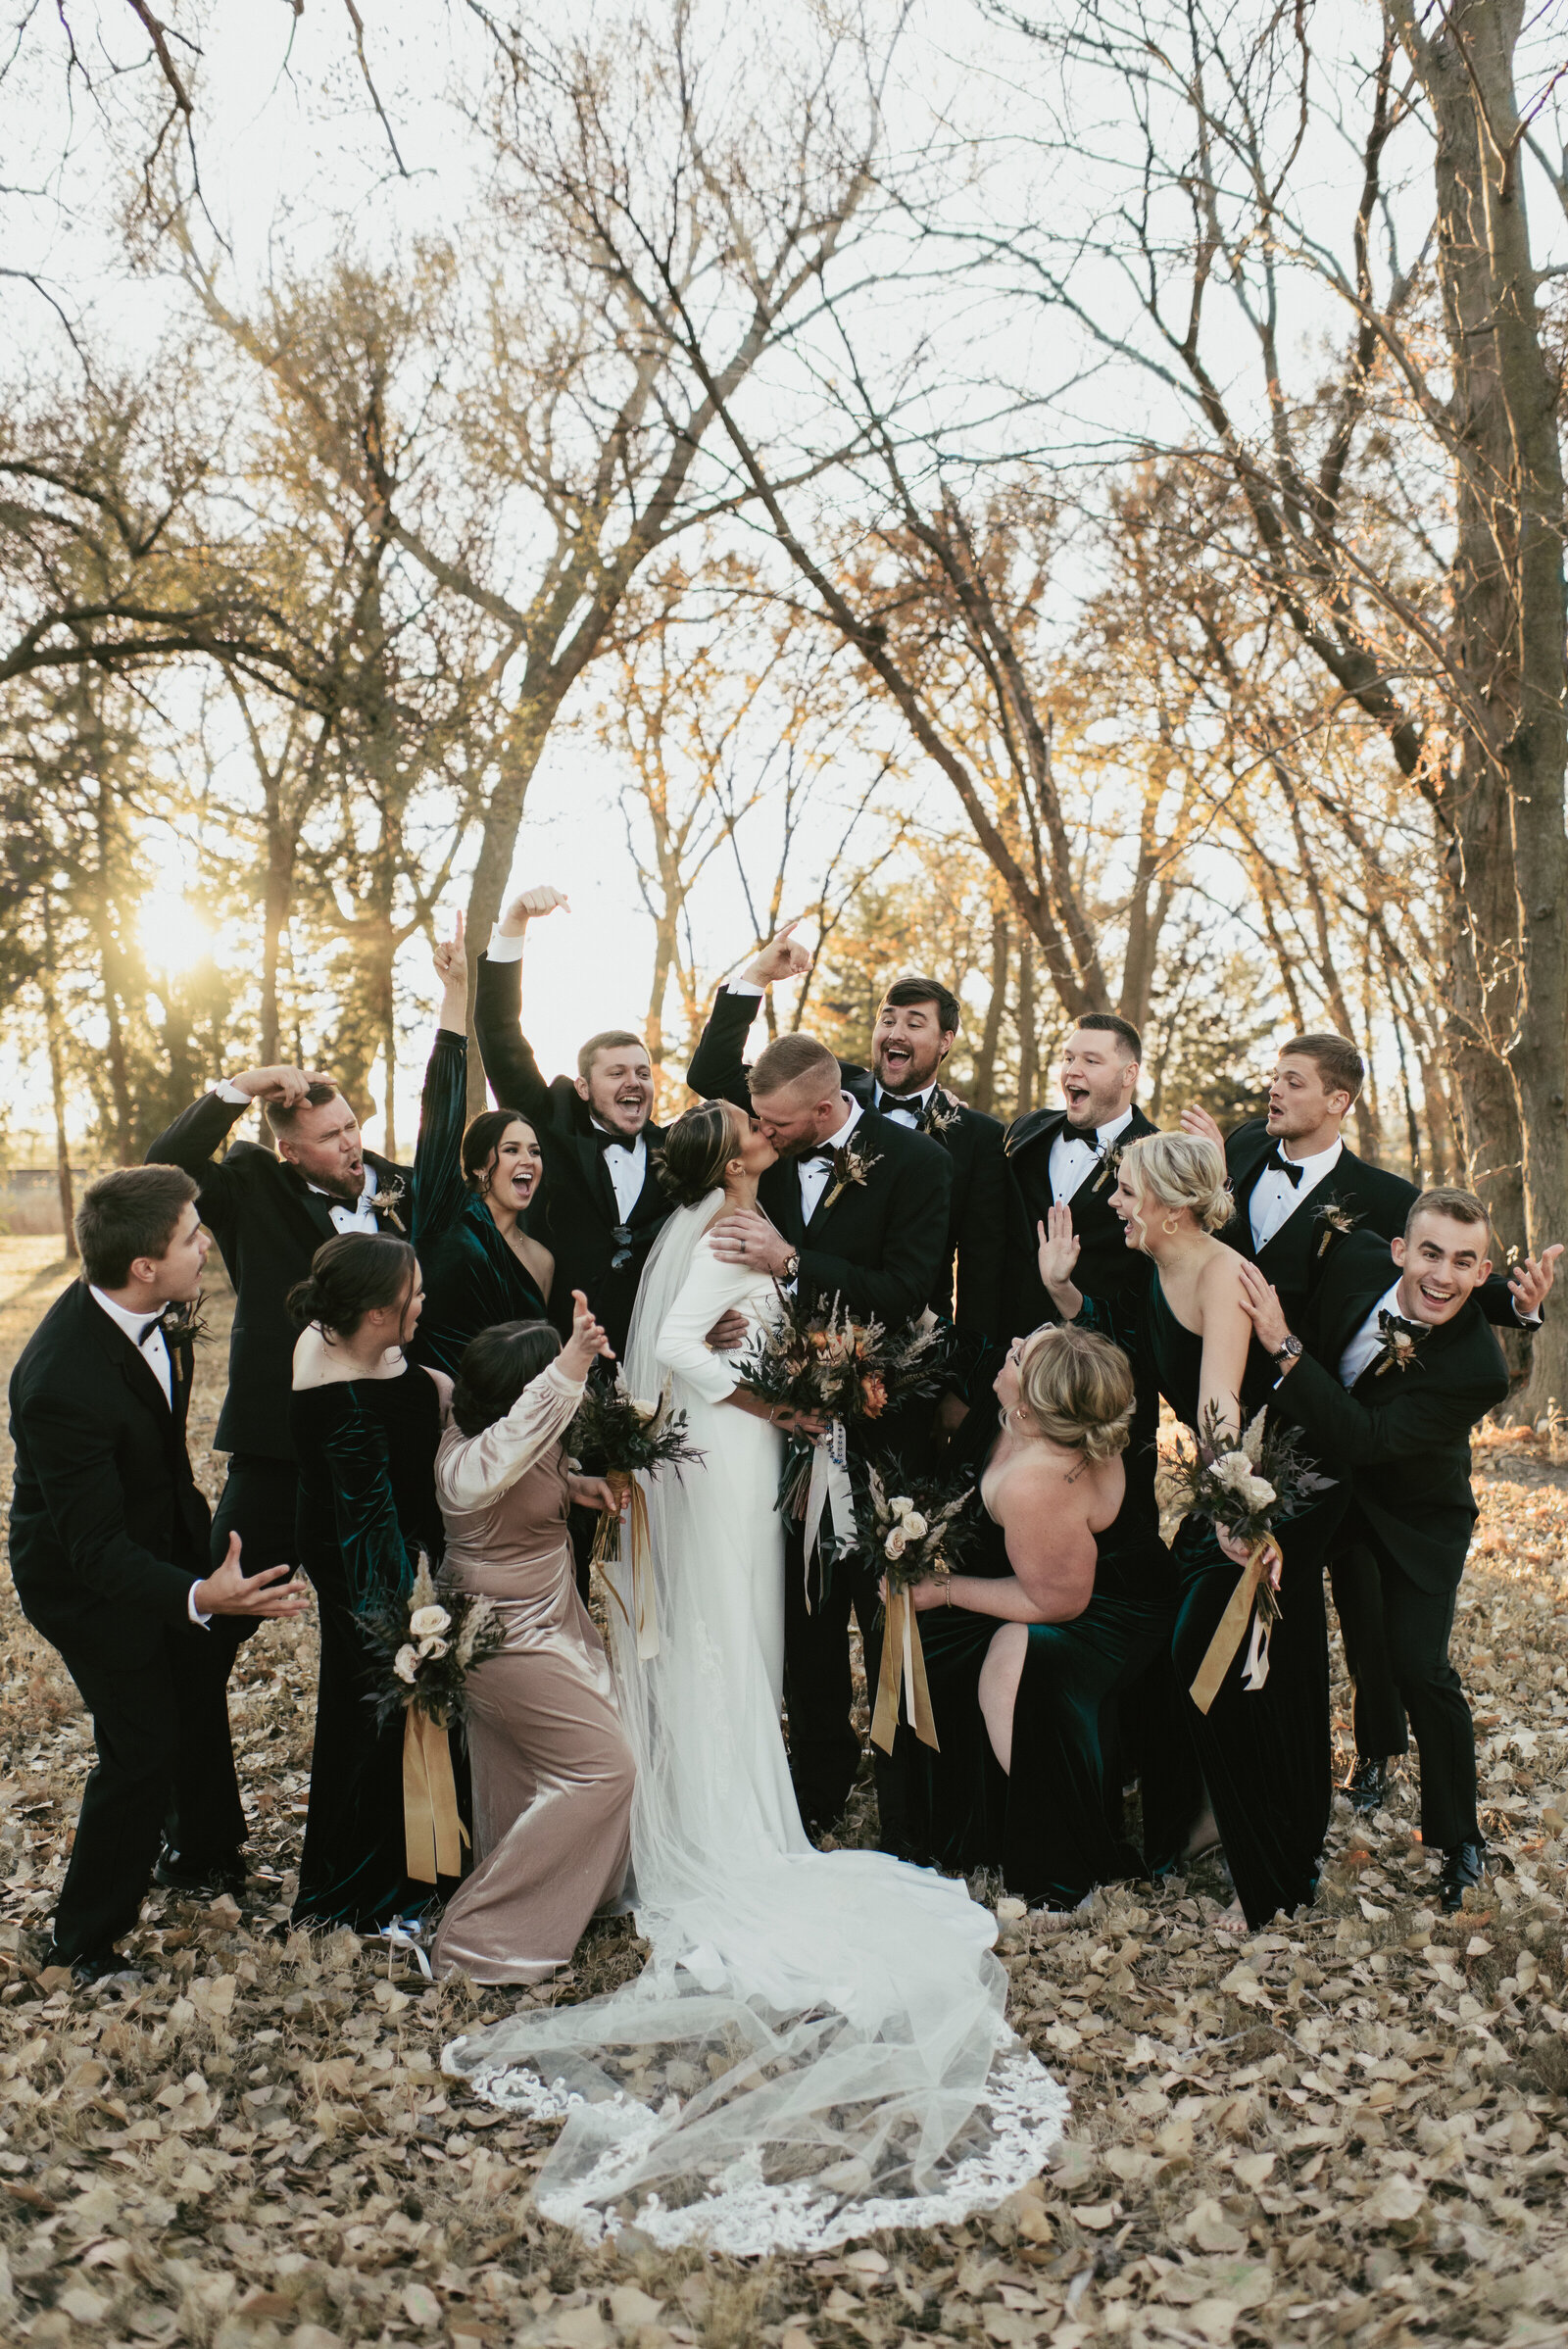 bridal party cheering while bride and groom kiss and celebrate after wedding ceremony